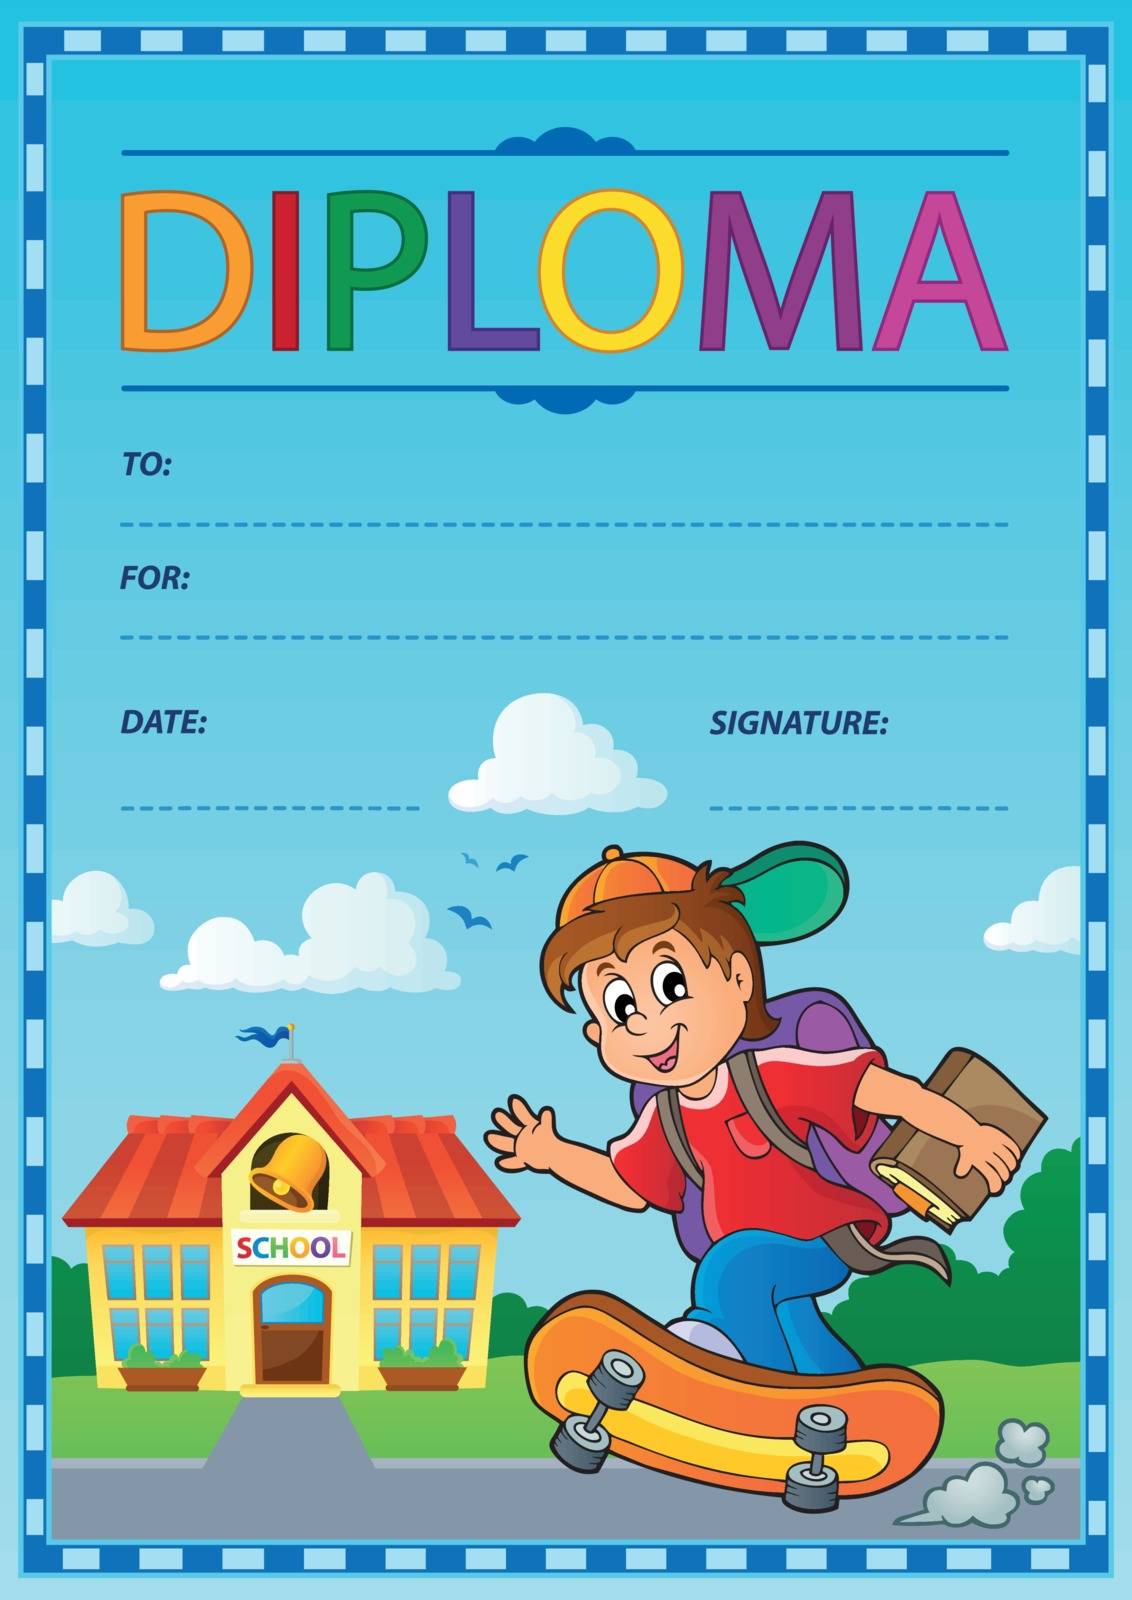 Diploma composition image 7 - eps10 vector illustration.